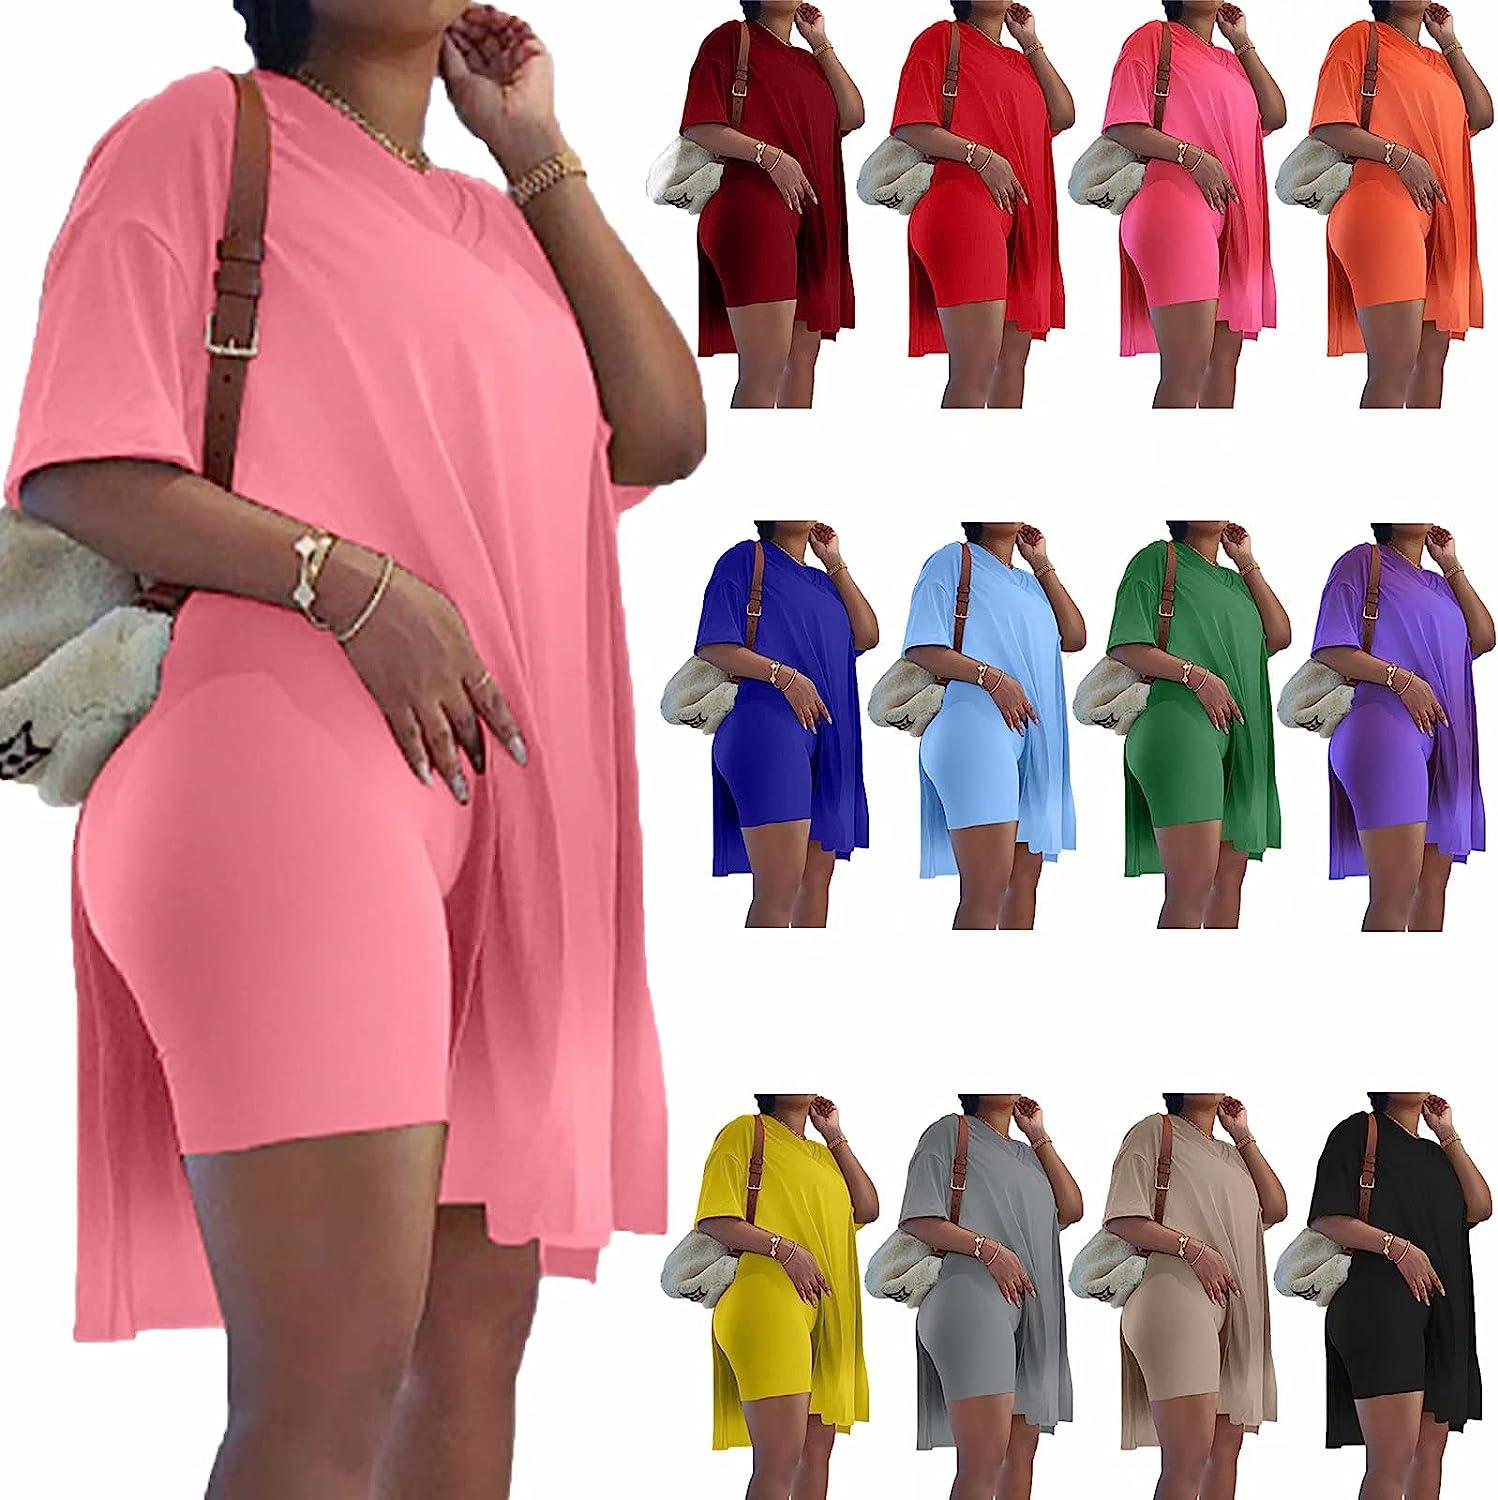 Difanlv Plus Size Womens 2 Piece Outfits Tracksuits Short Sleeve Tunic Tops  Bodycon Shorts Sweatsuit Sets